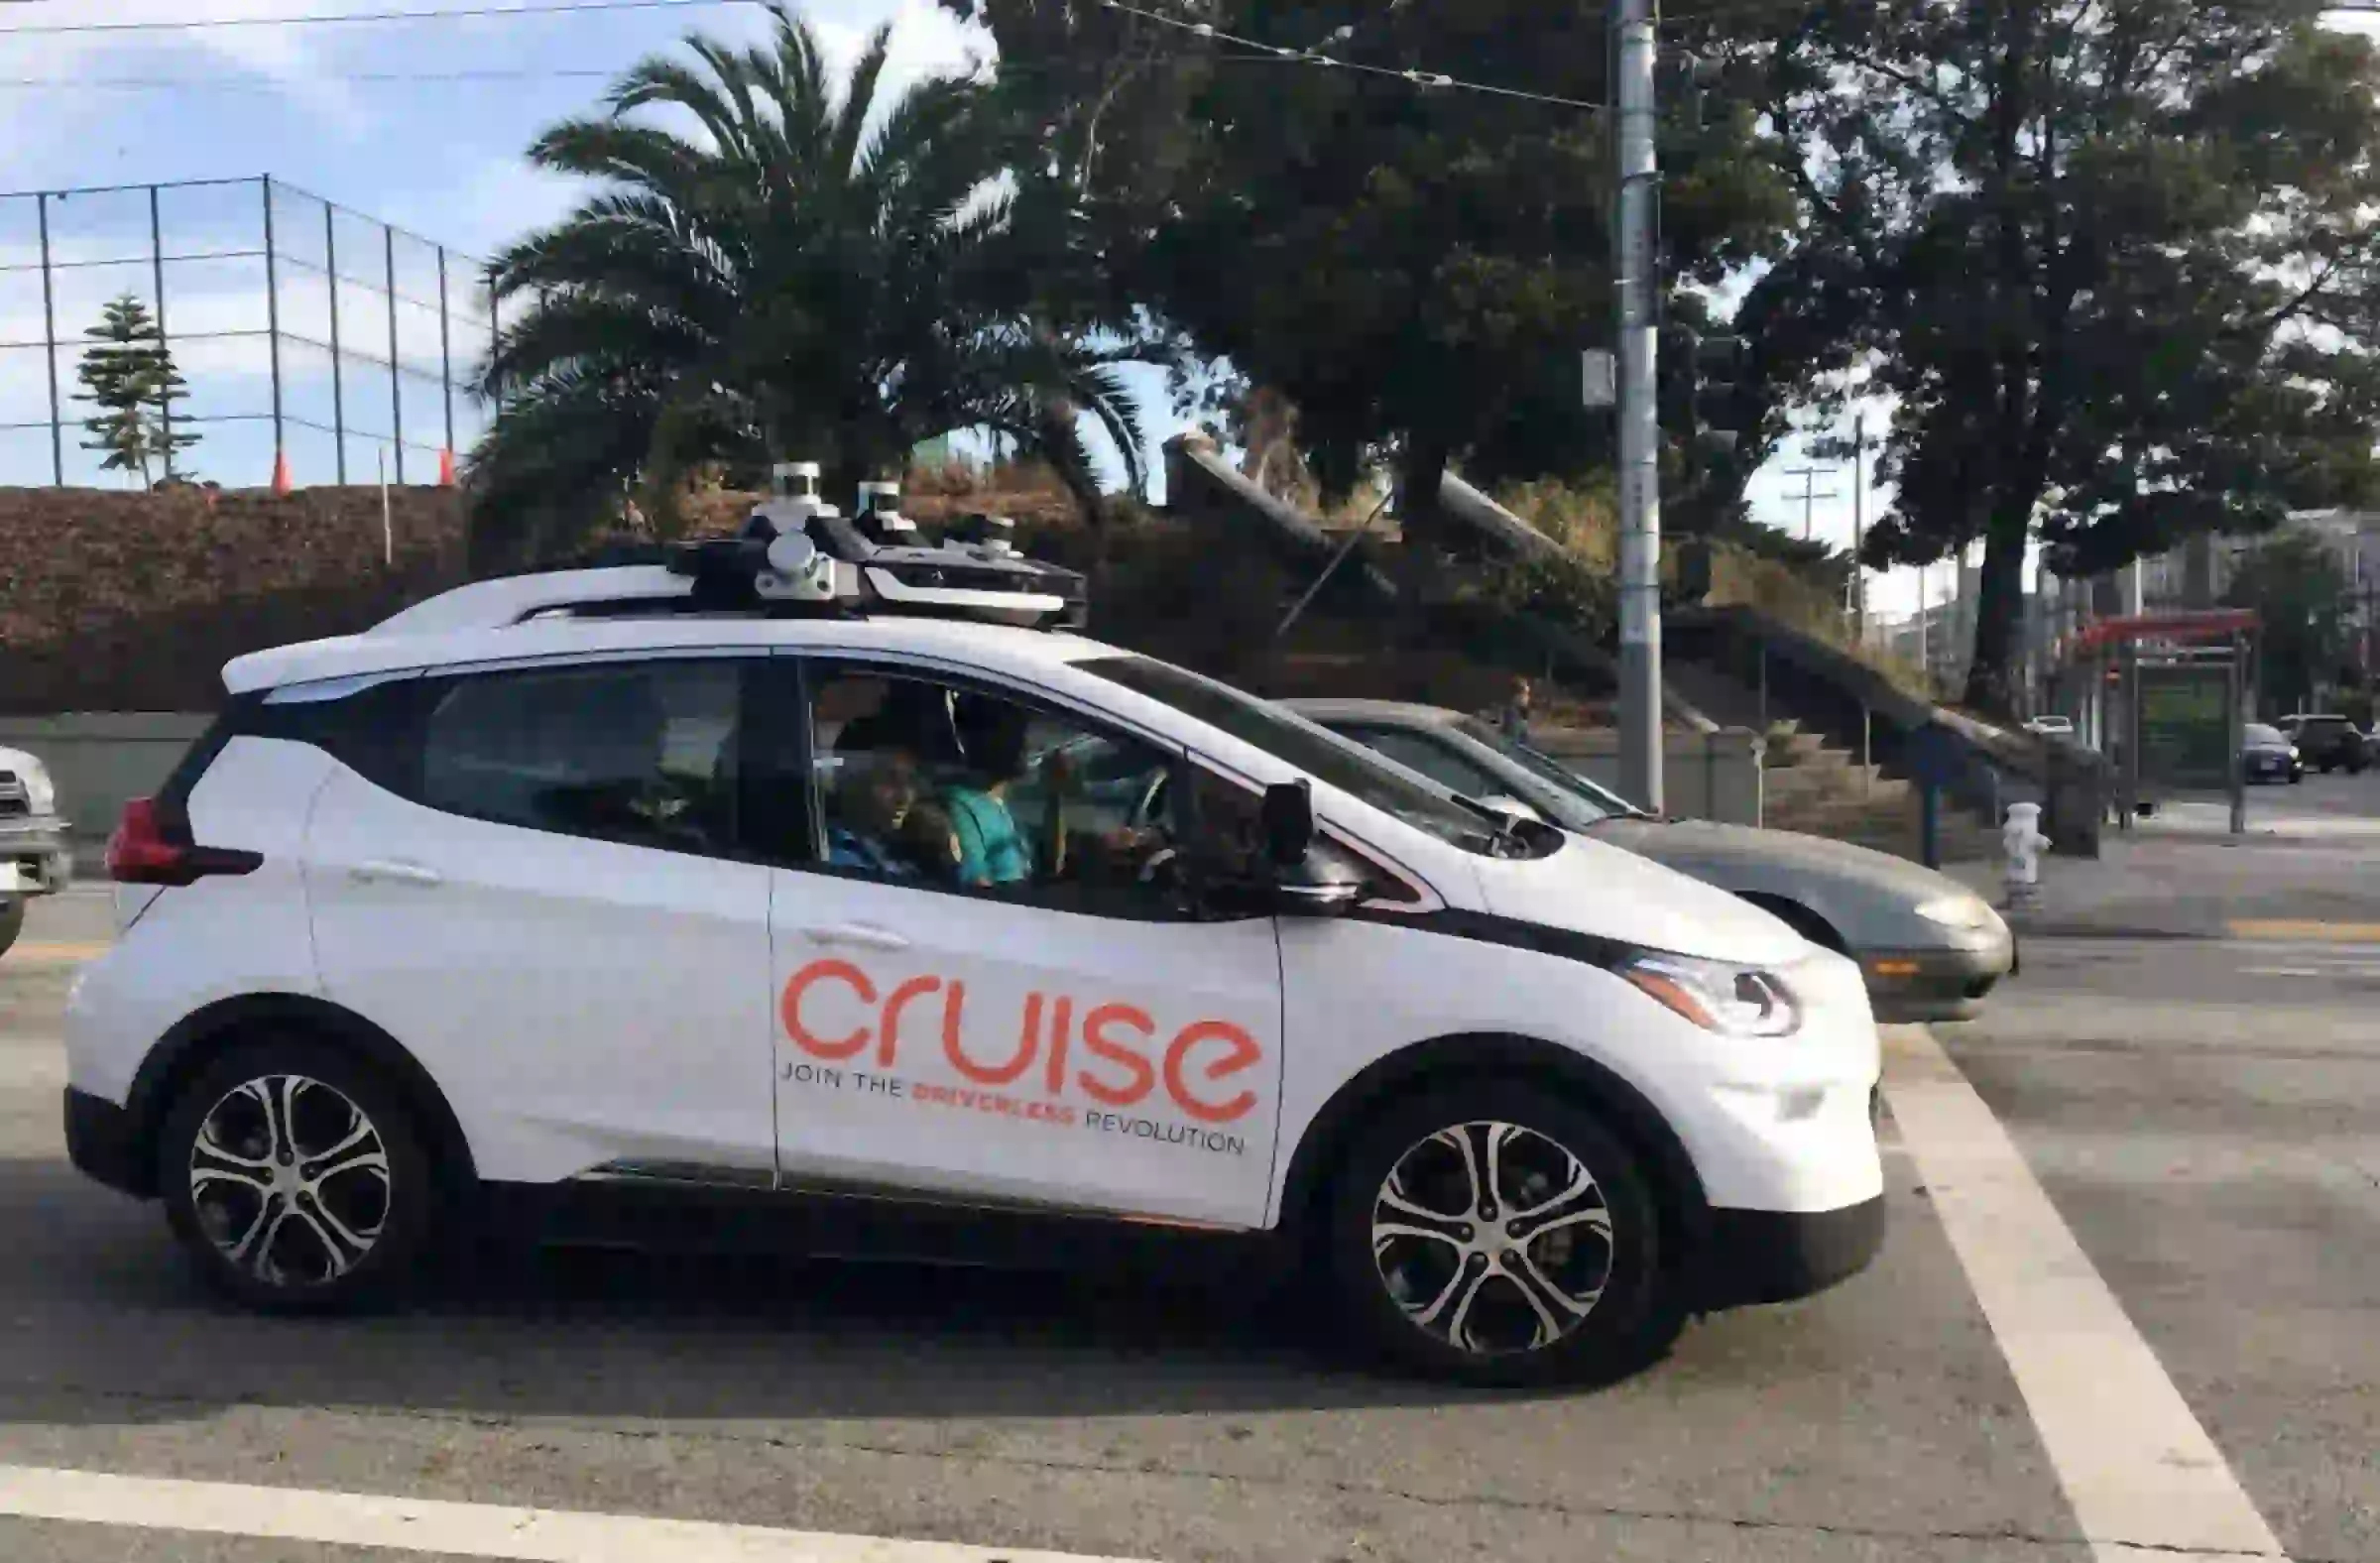 A Cruise self-driving car, which is owned by General Motors Corp, is seen outside the company’s headquarters in San Francisco where it does most of its testing, in California, U.S., September 26, 2018. REUTERS/Heather Somerville